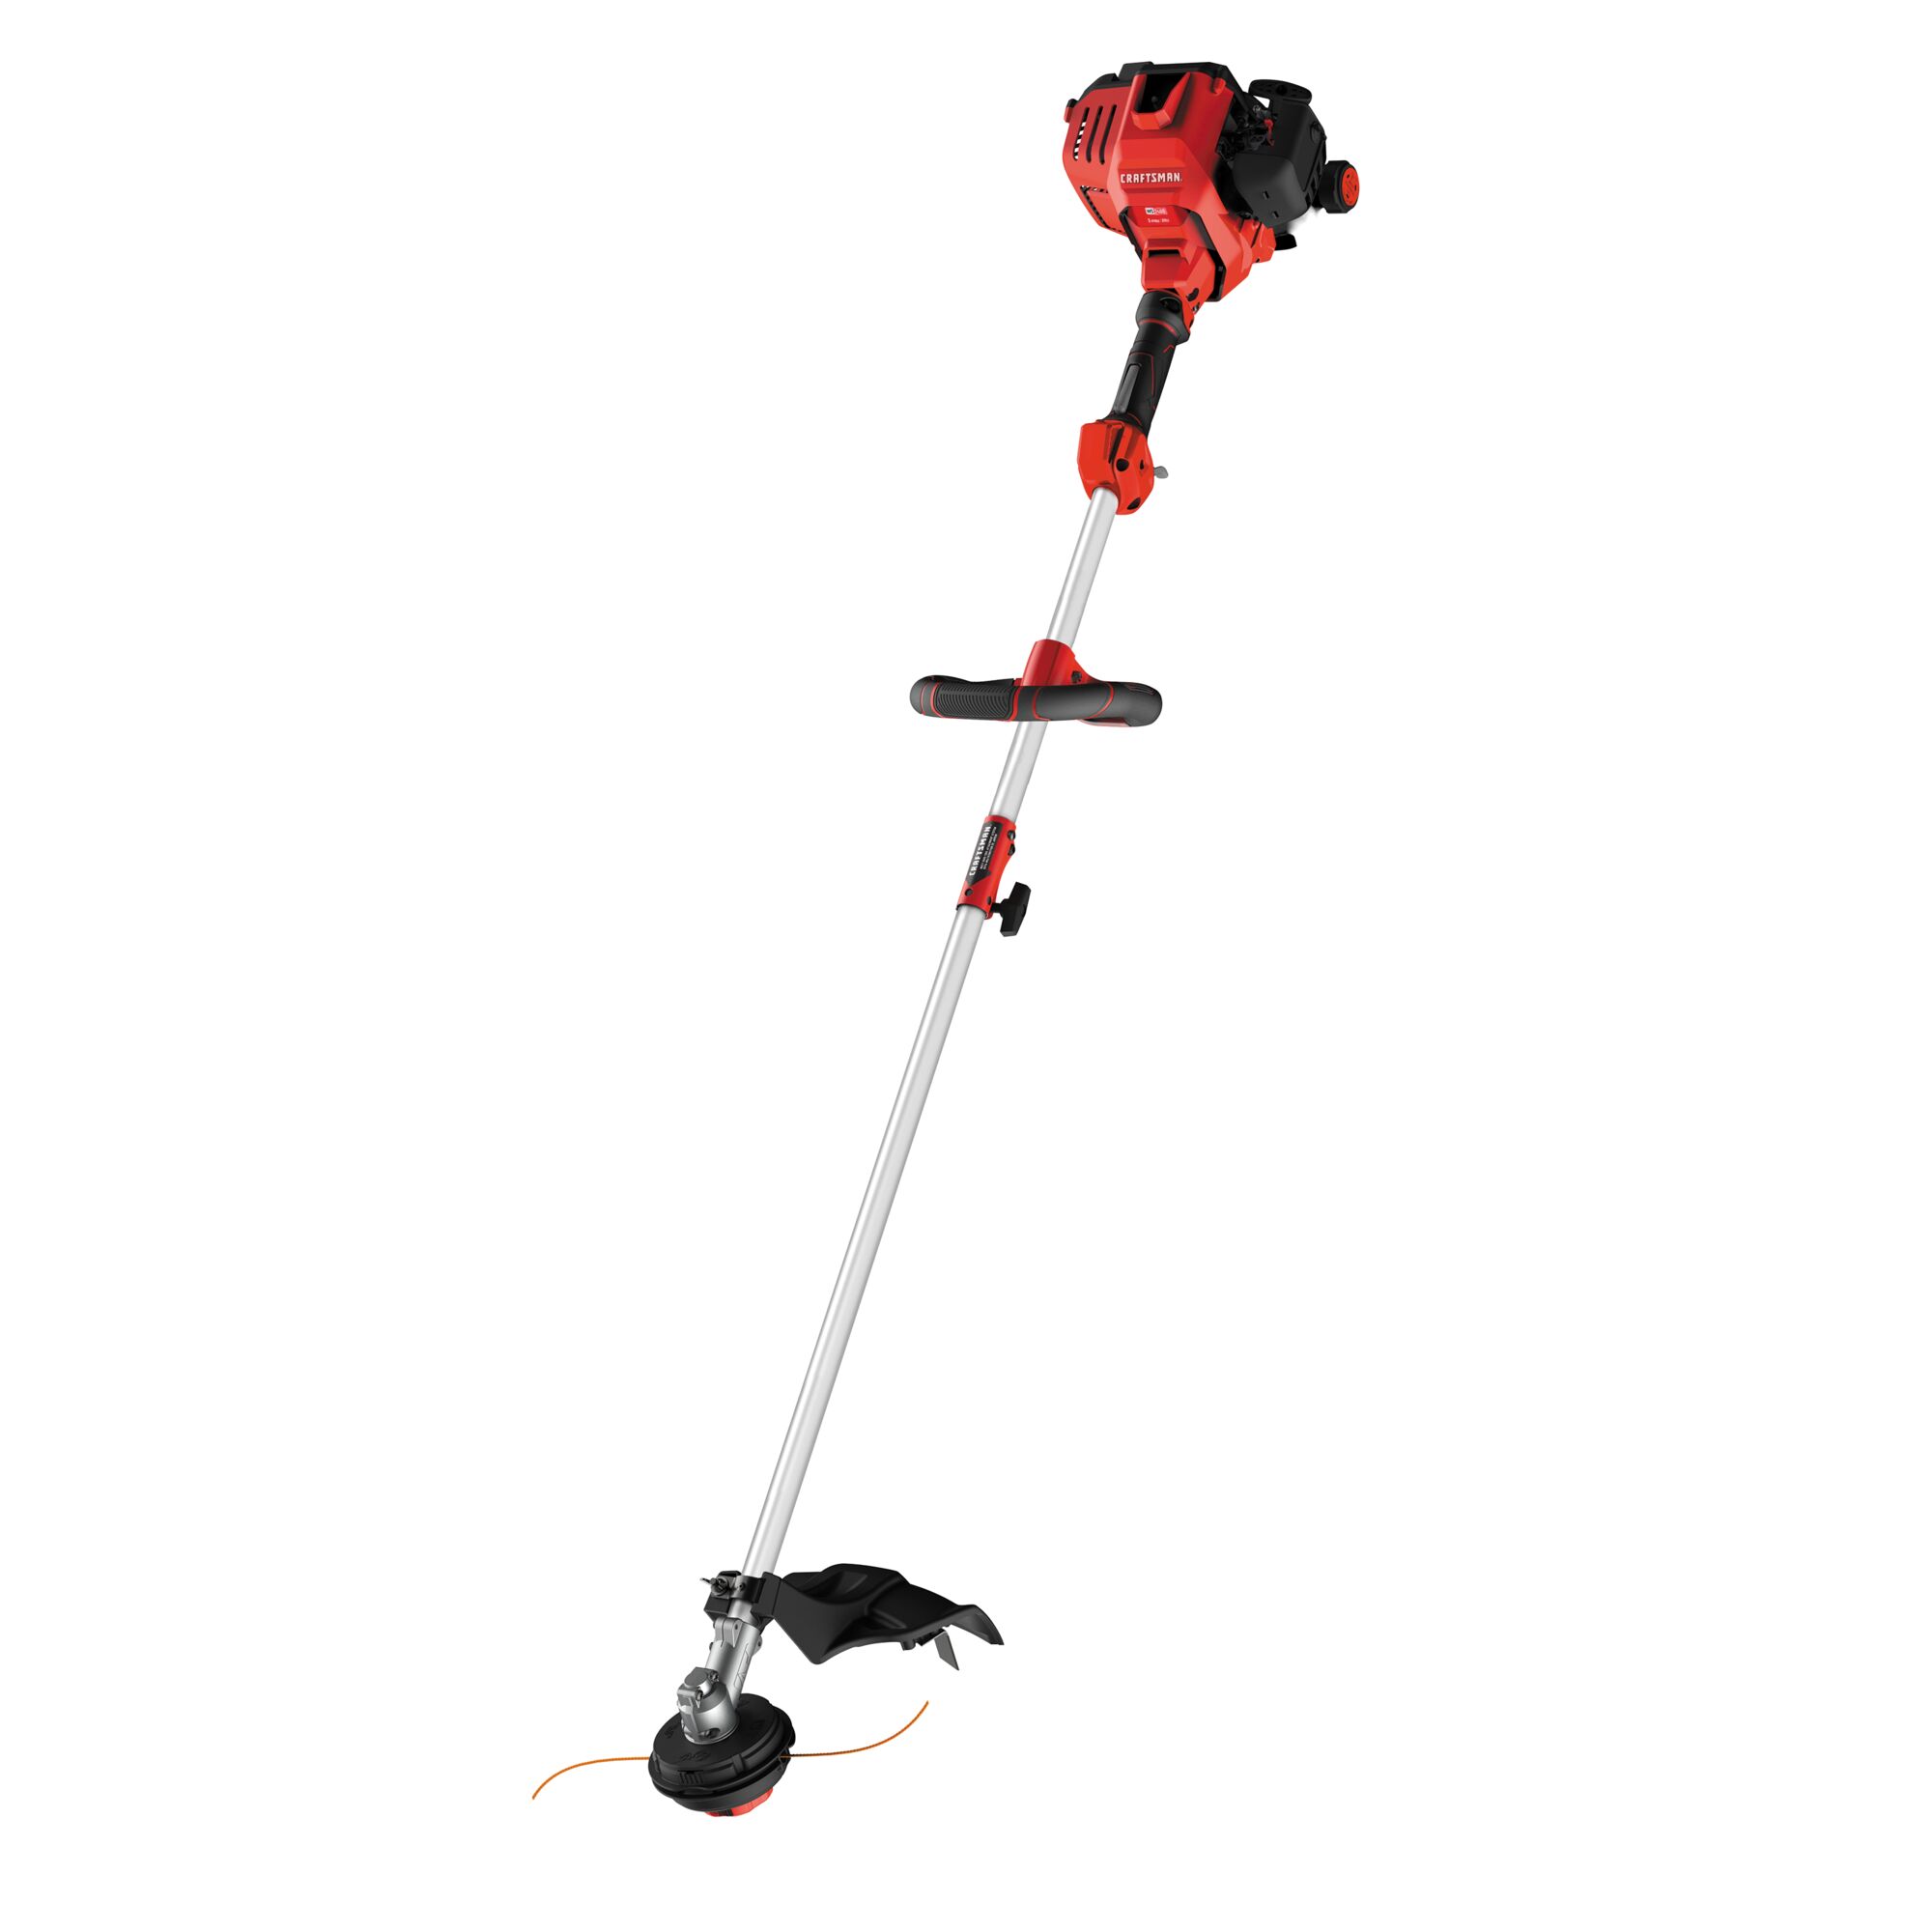 Weedwacker 27 C C 2 cycle 18 inch attachment capable straight shaft gas trimmer.